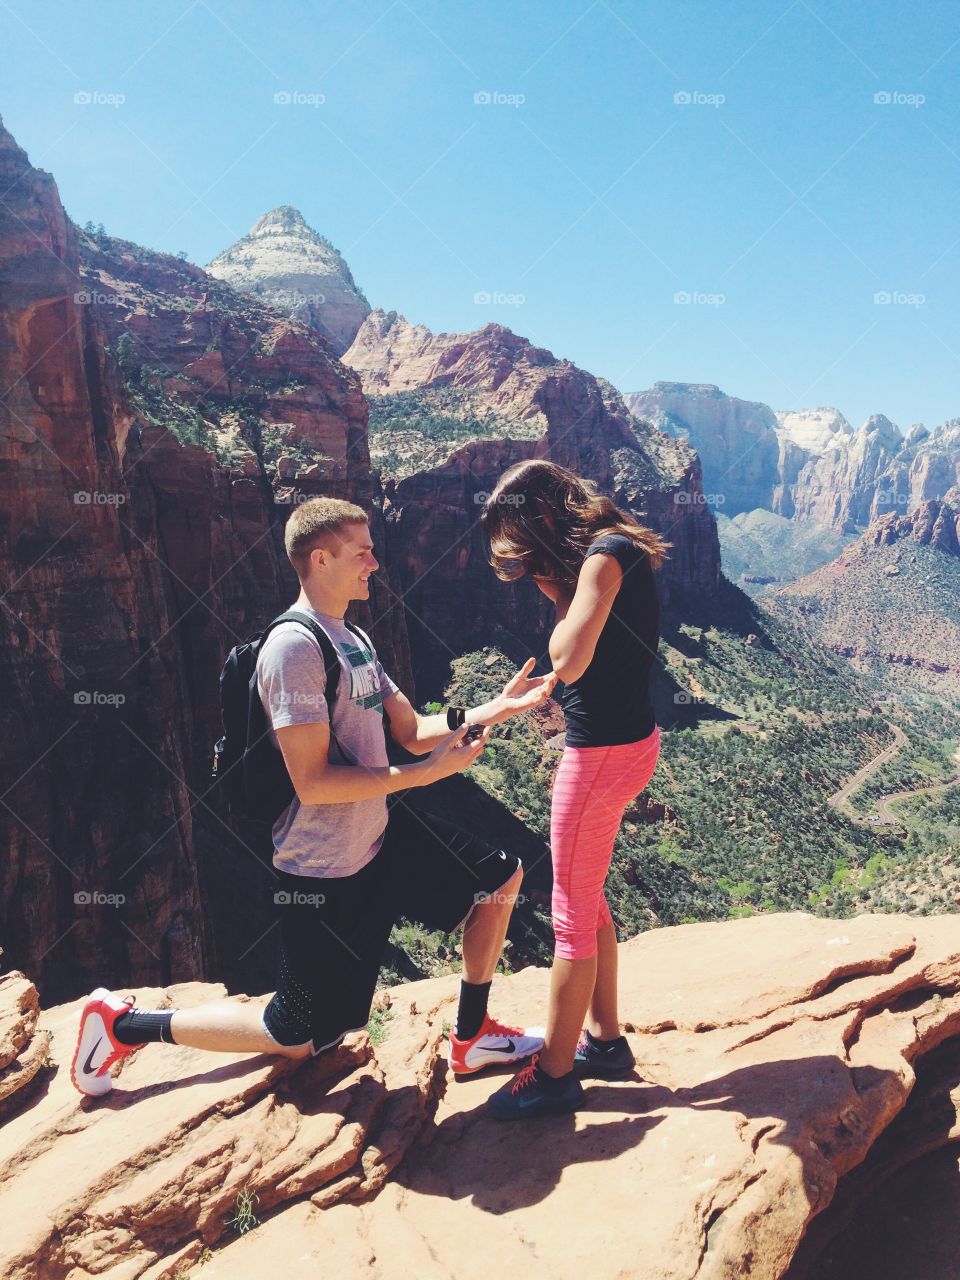 Proposal in Zion national park 